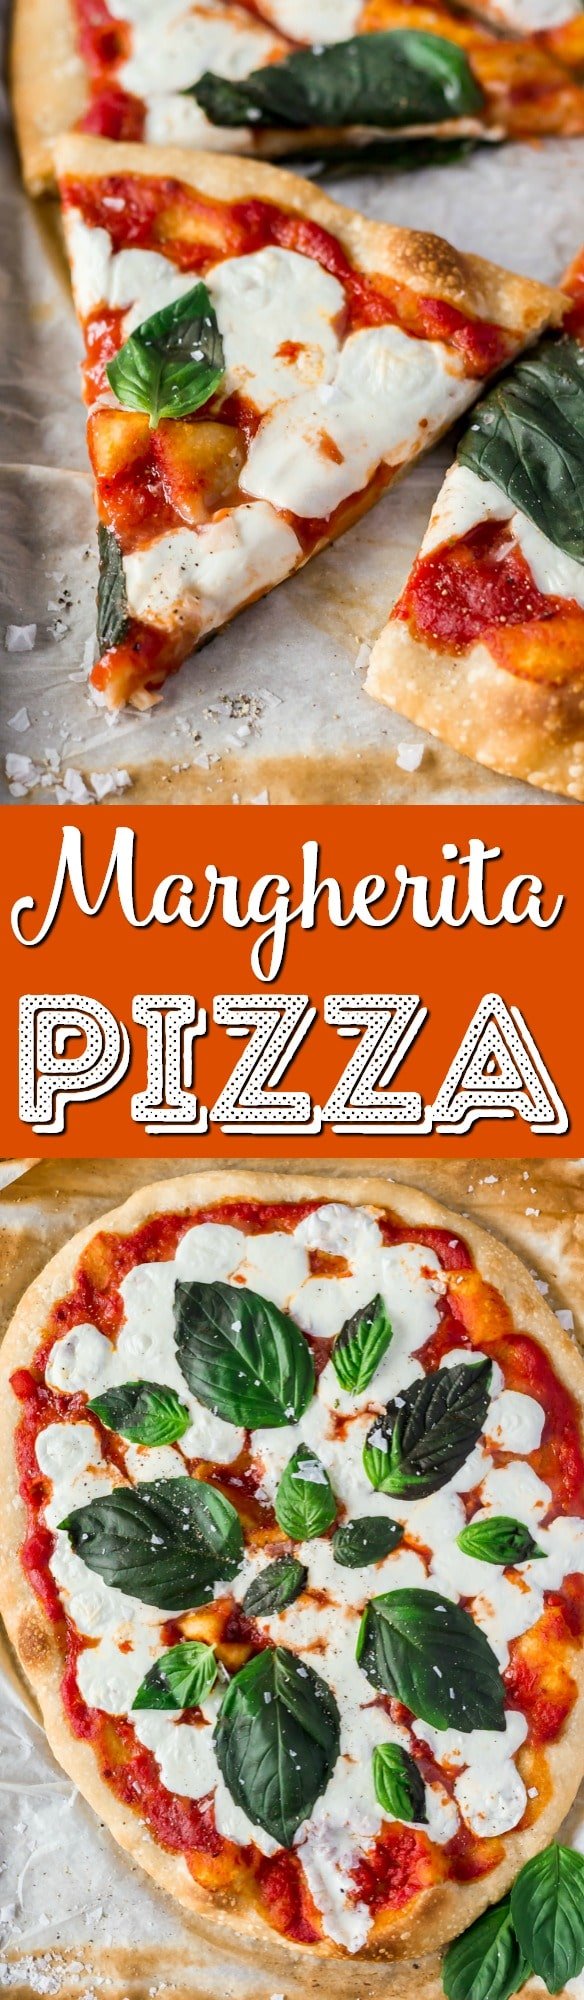 A Classic Margherita Pizza made with delicious dough, olive oil, crushed tomatoes, garlic, mozzarella, and basil always hits the spot when you need a quick and easy dinner recipe! via @sugarandsoulco